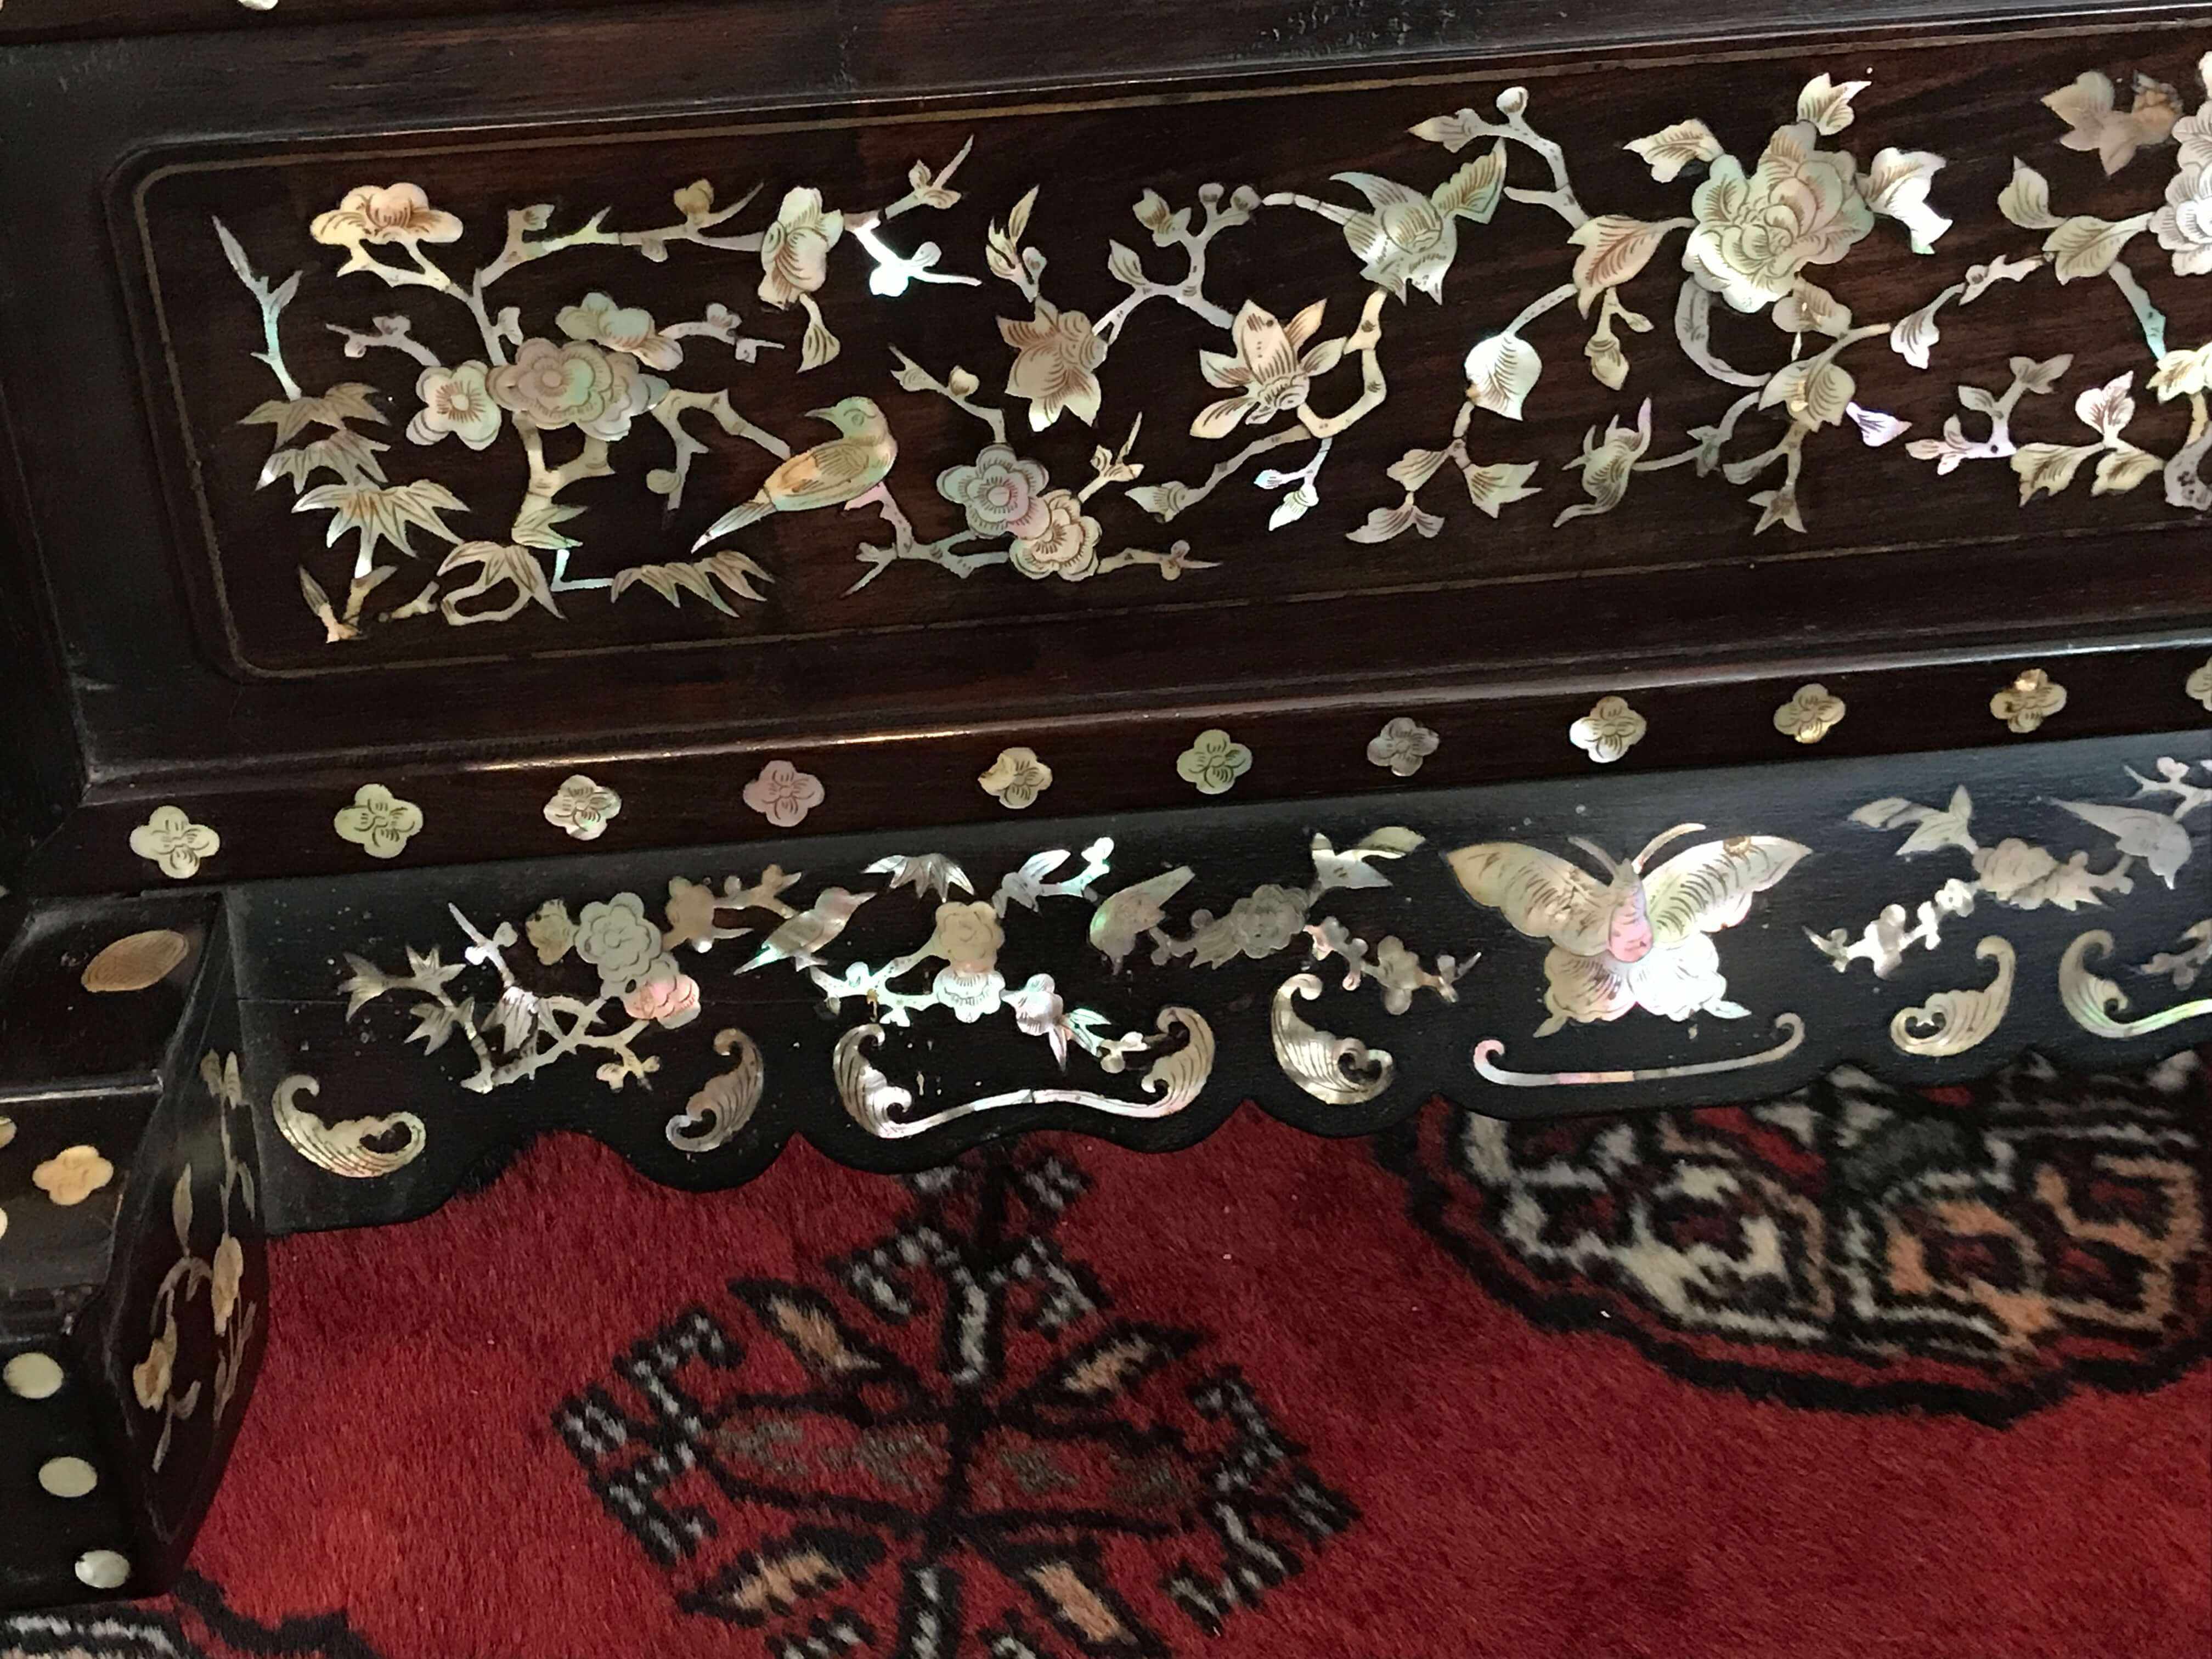 A Chinese Export ebonised, hardwood and mother-of-pearl inlaid table screen, late 19th century